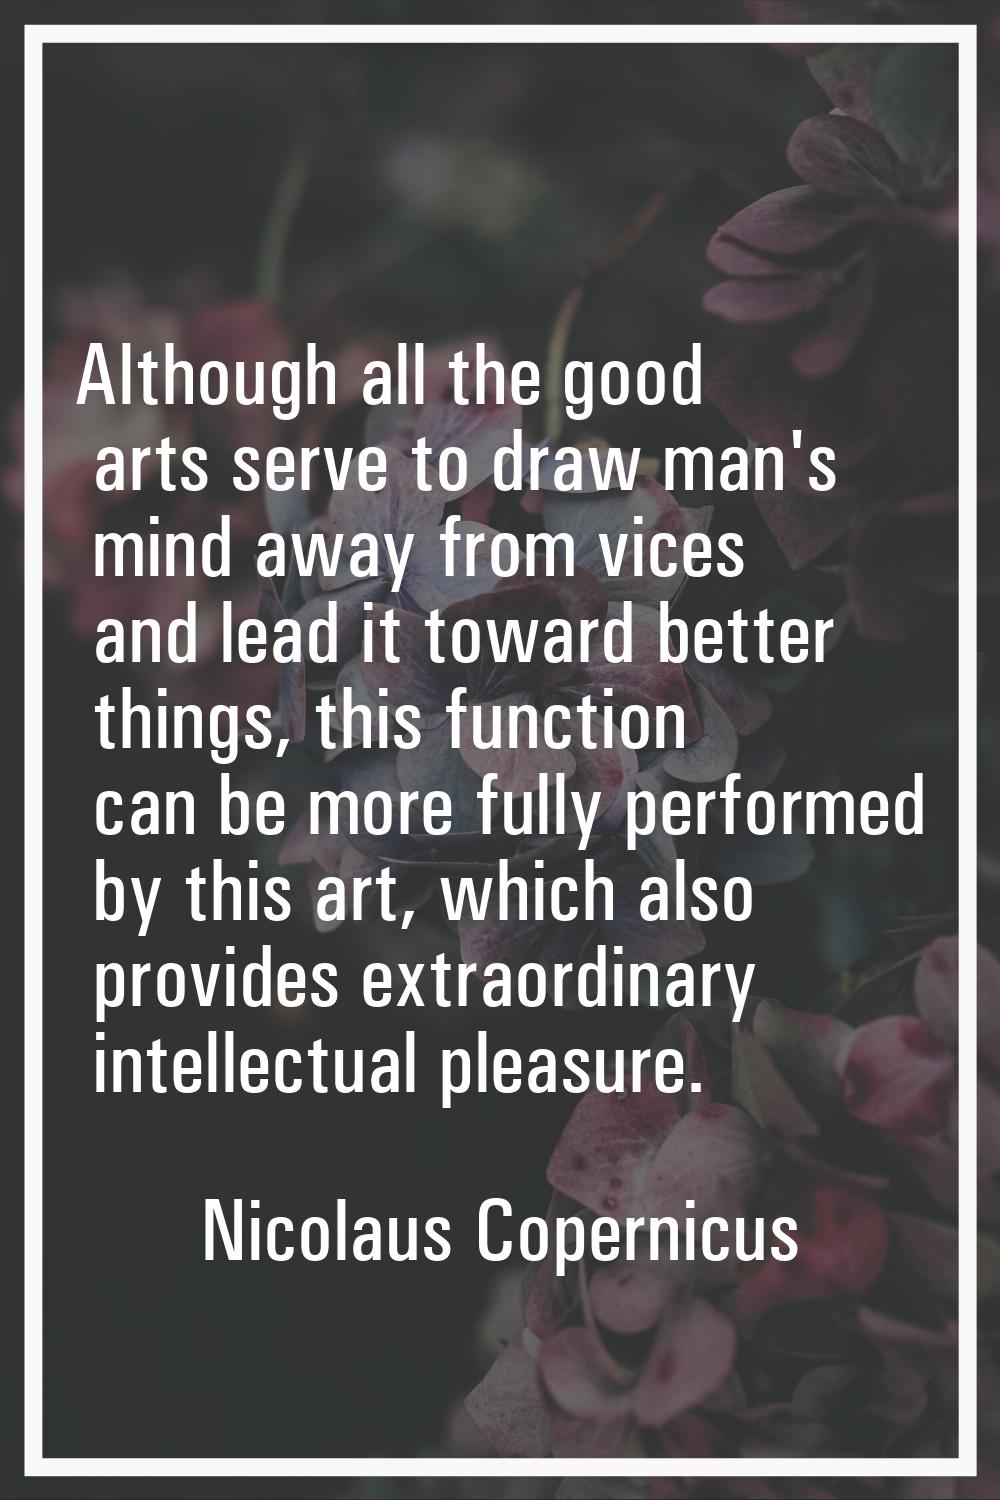 Although all the good arts serve to draw man's mind away from vices and lead it toward better thing